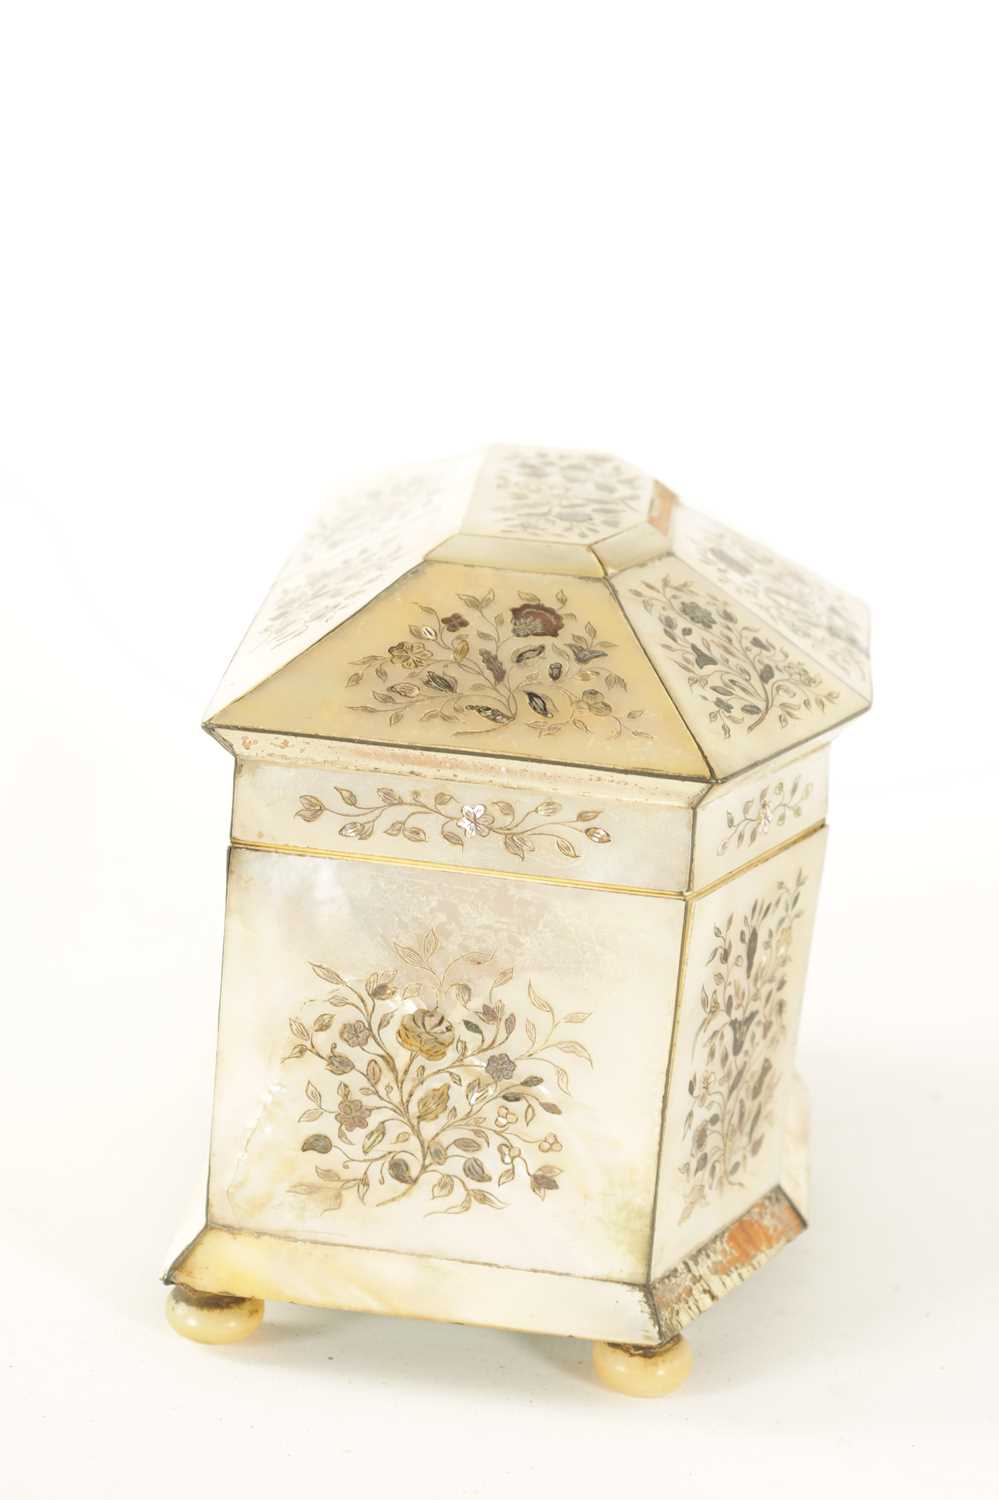 A 19TH CENTURY INLAID MOTHER OF PEARL TEA CADDY WITH CANTED ANGLED FRONT - Image 8 of 10